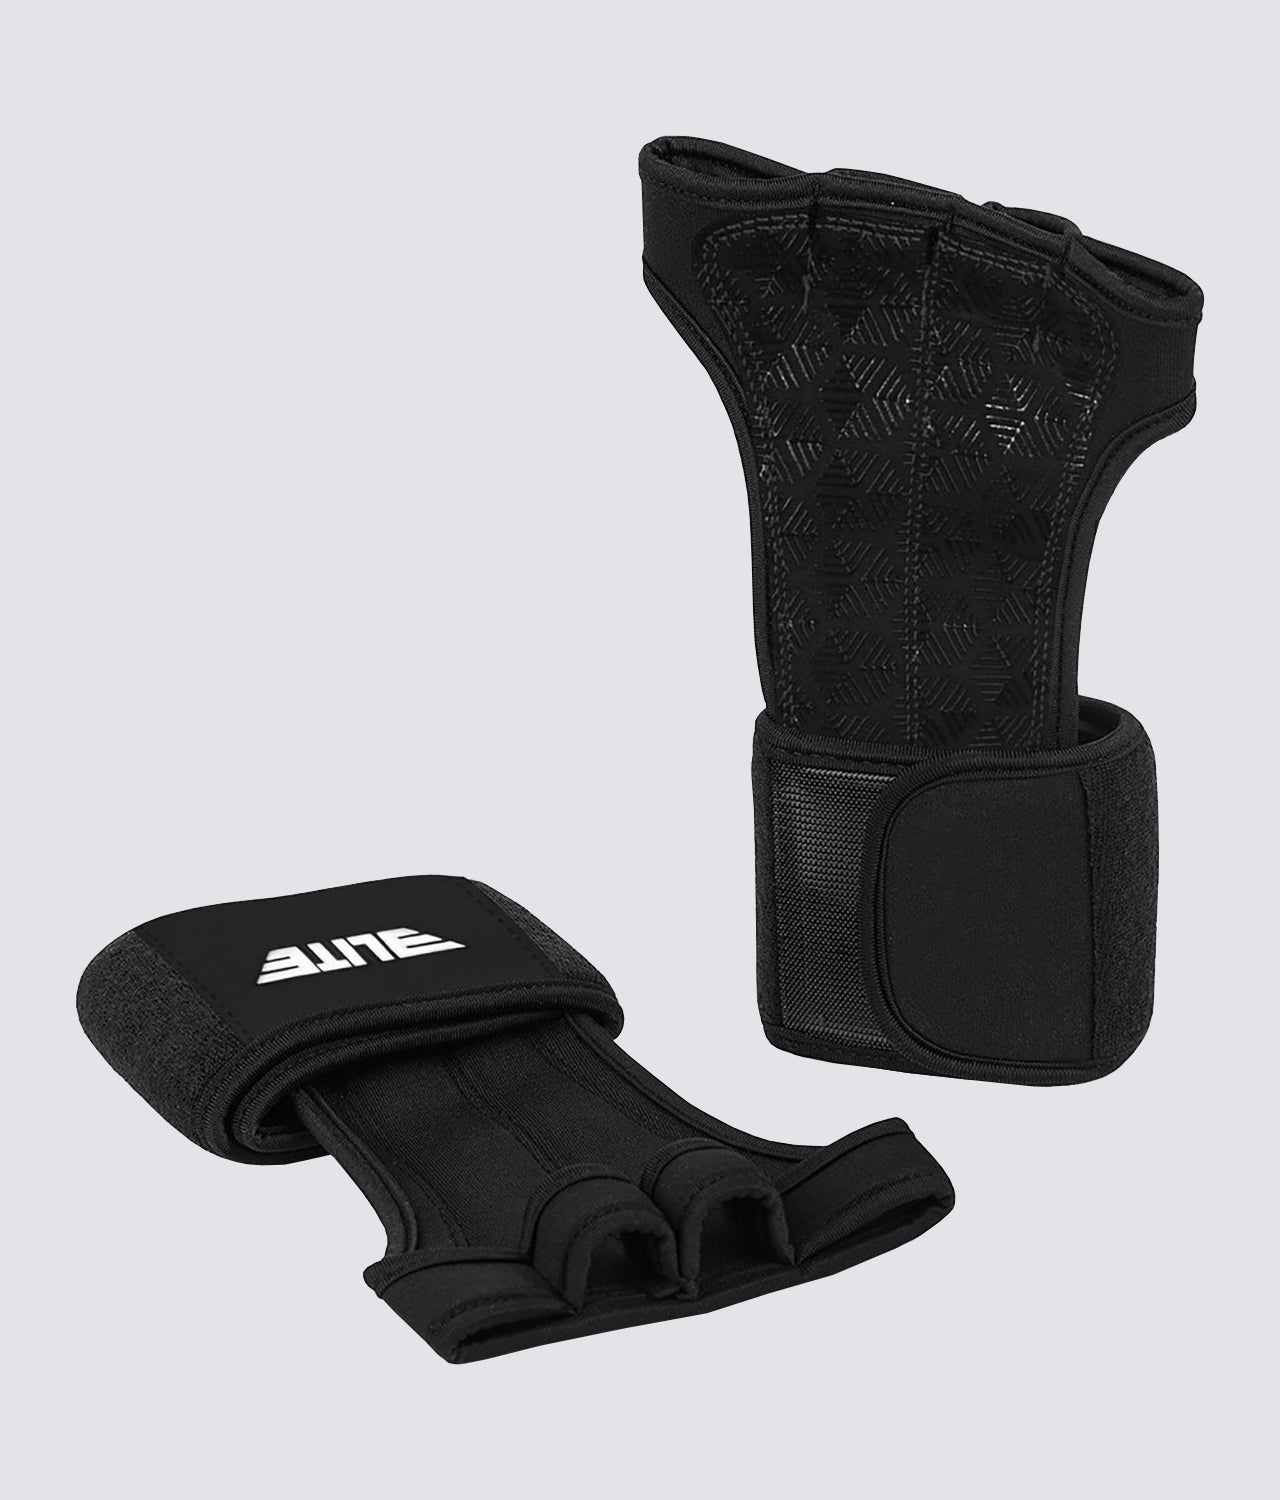 Elite Sports Adults' Cross Training Gloves with Wrist Straps